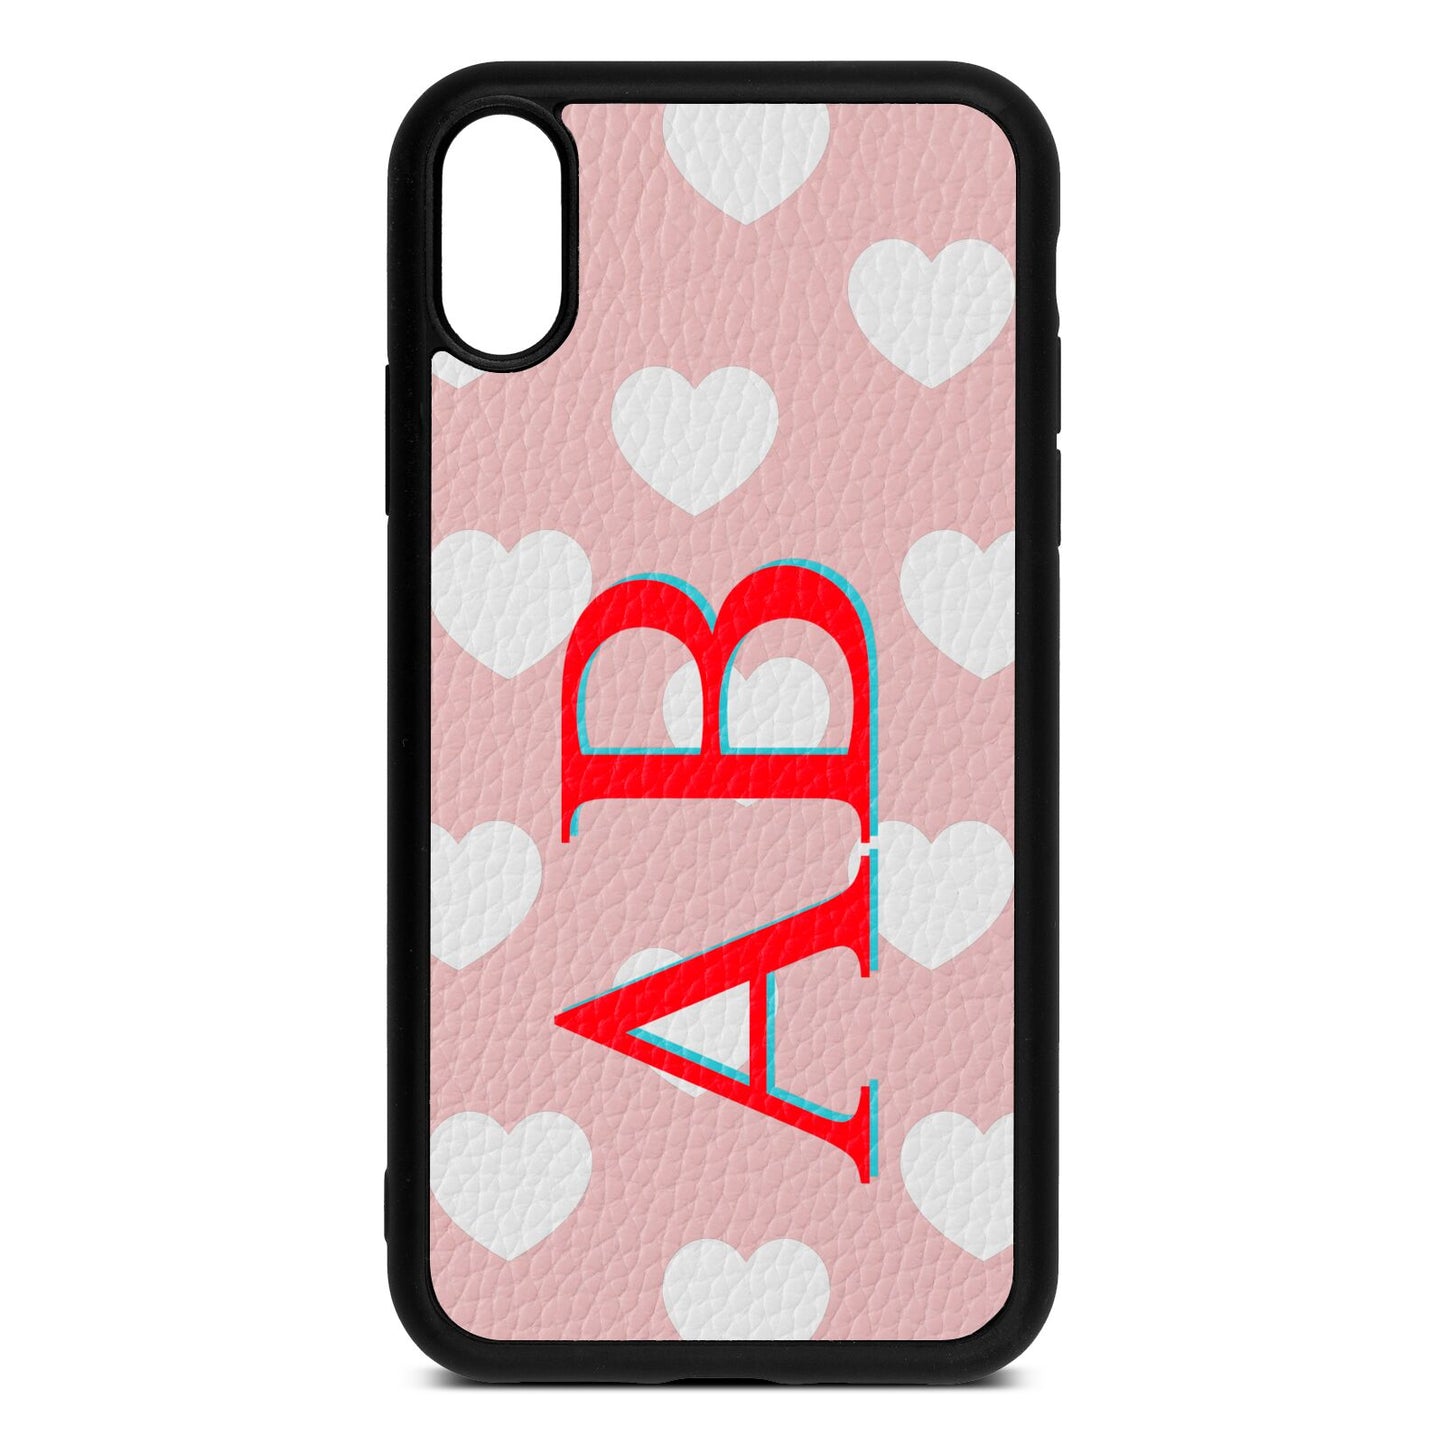 Heart Print Initials Pink Pebble Leather iPhone Xr Case